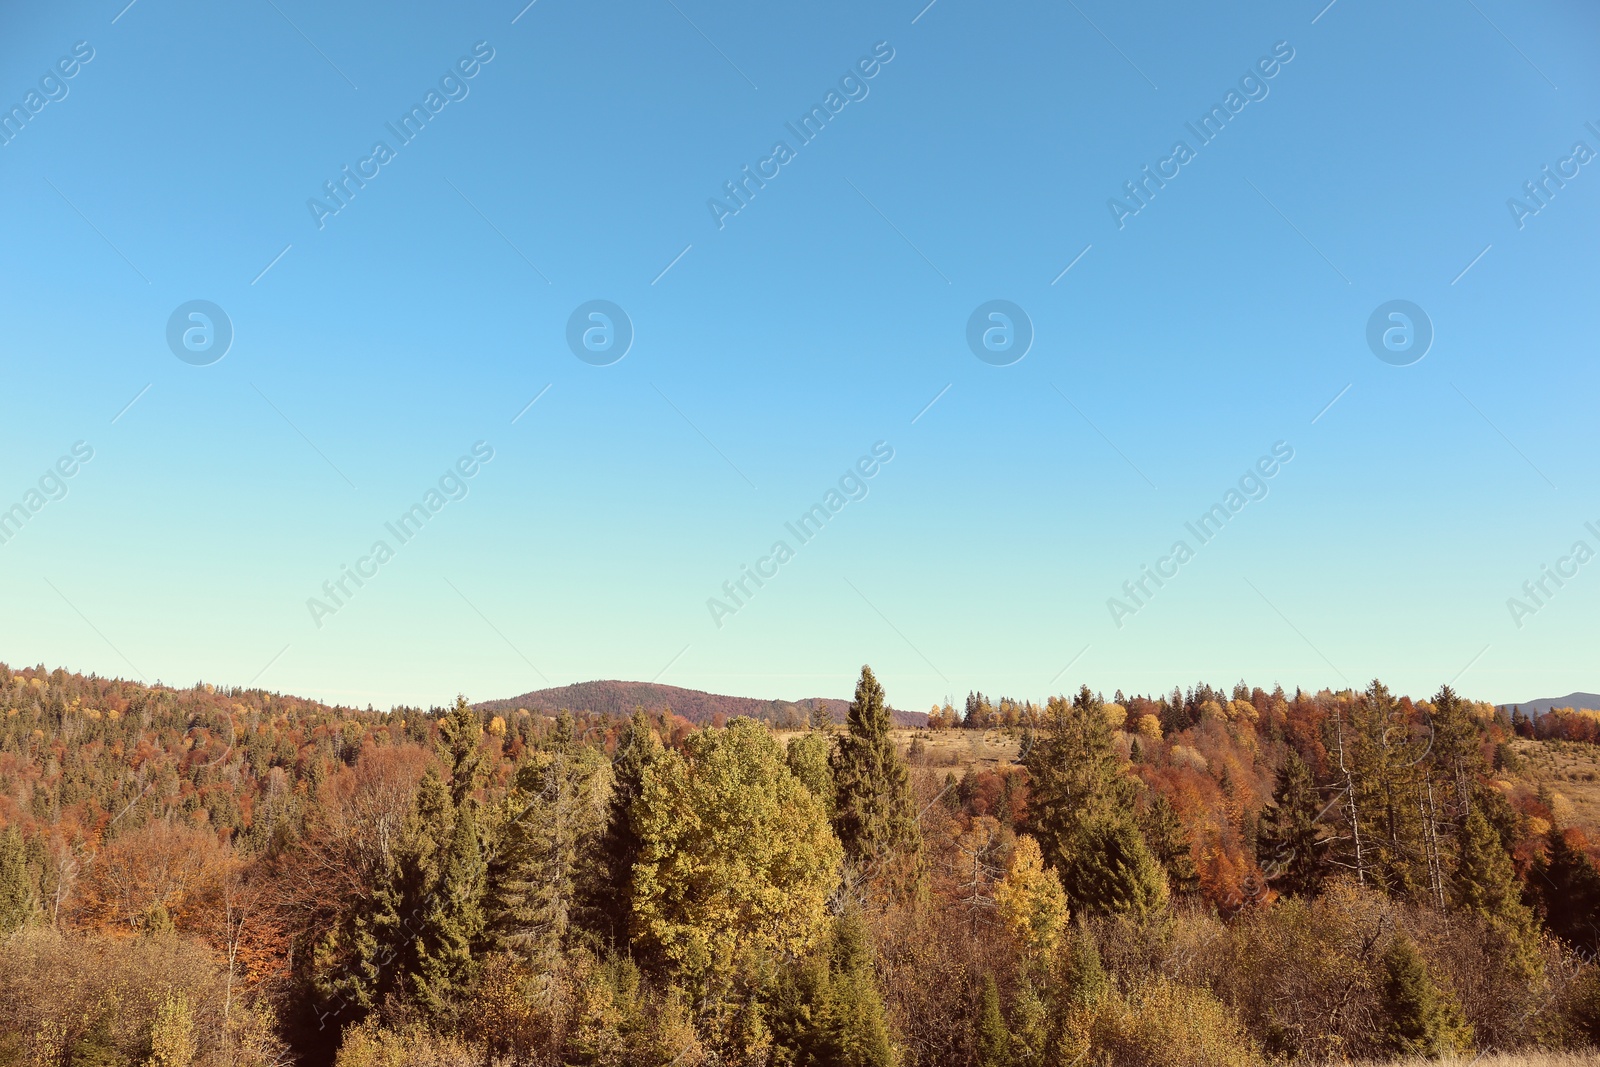 Photo of Picturesque landscape with blue sky over mountains